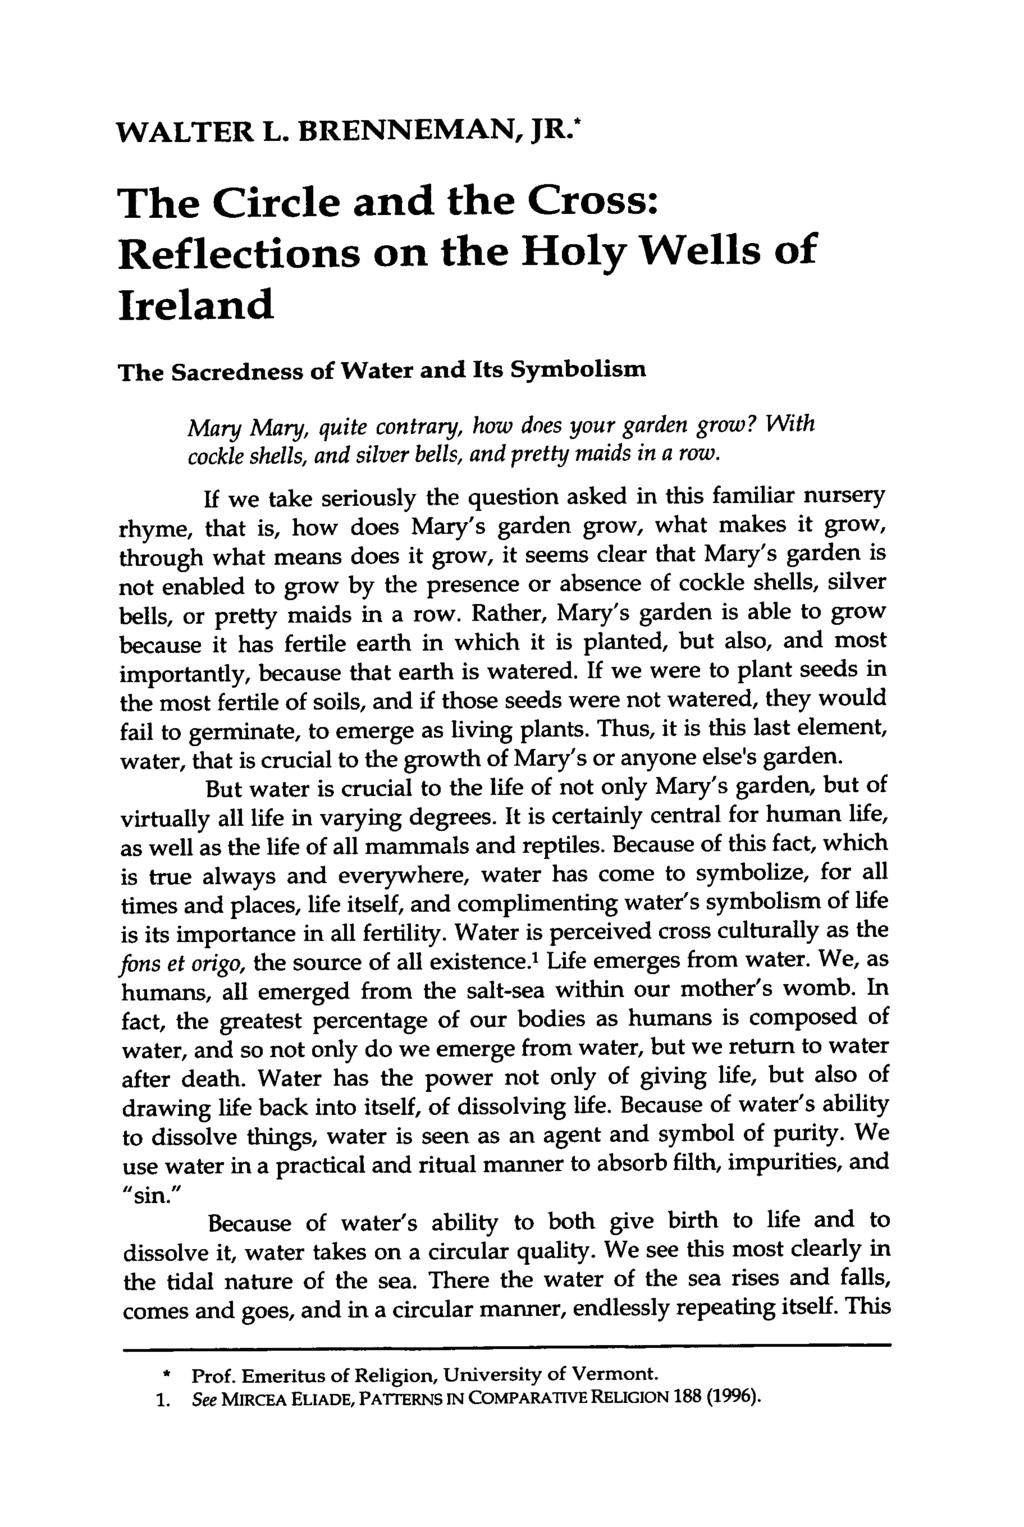 WALTER L. BRENNEMAN, JR.* The Circle and the Cross: Reflections on the Holy Wells of Ireland The Sacredness of Water and Its Symbolism Mary Mary, quite contrary, how does your garden grow?